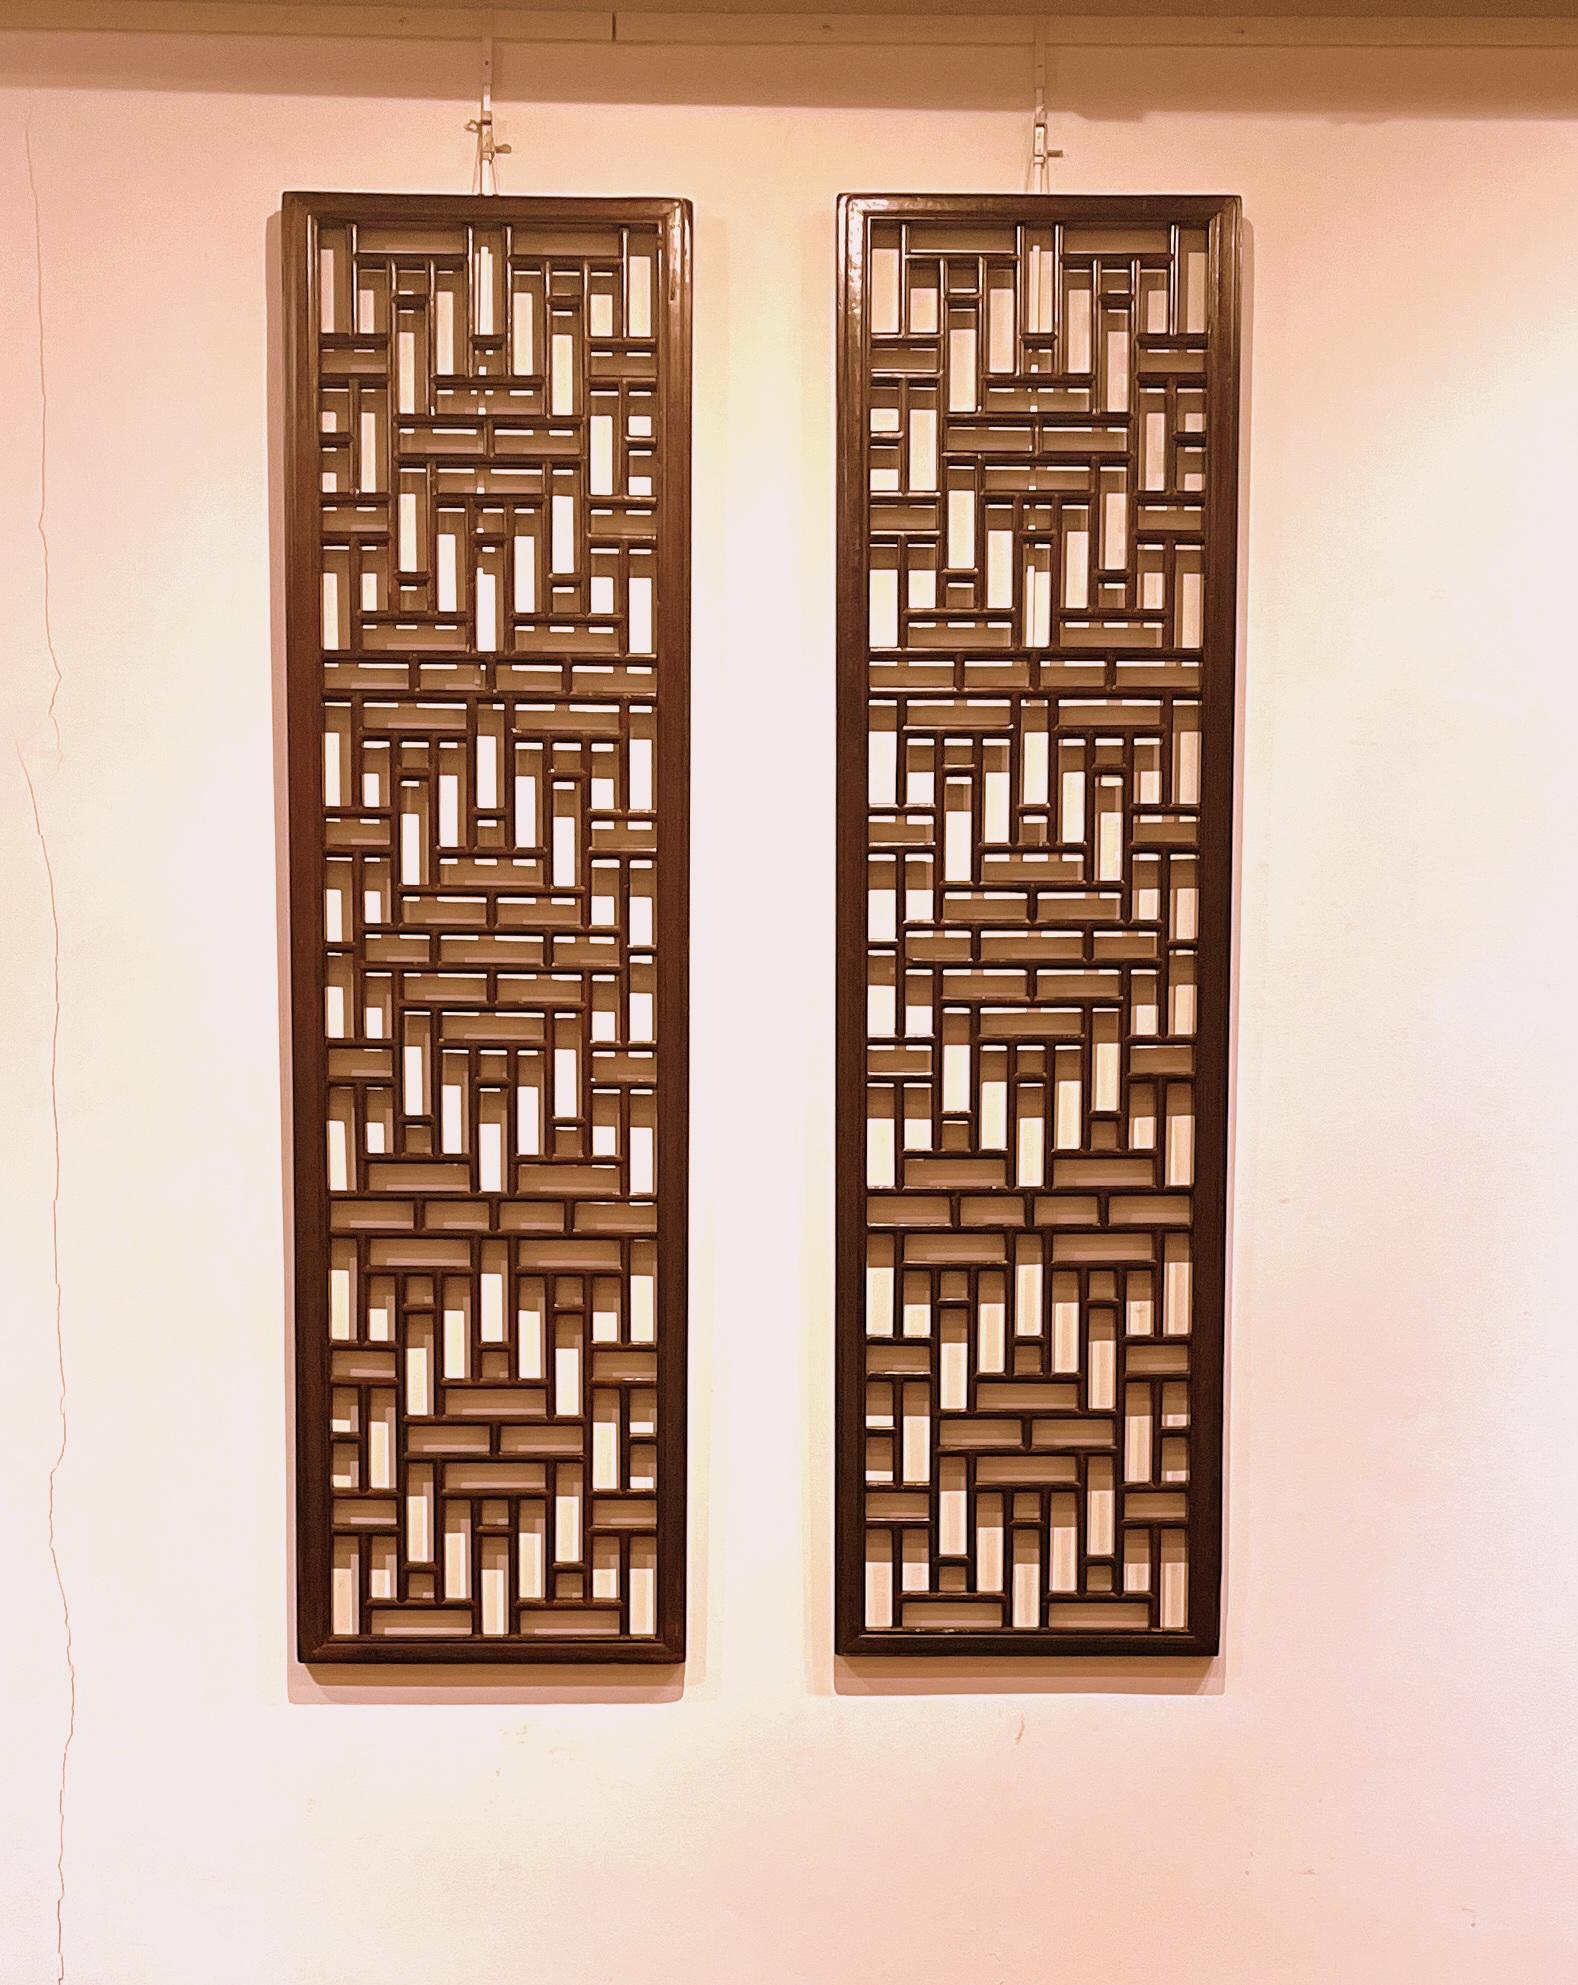 Pair of Asian window panels with geometric shapes design.
All constructed with joinery techniques.